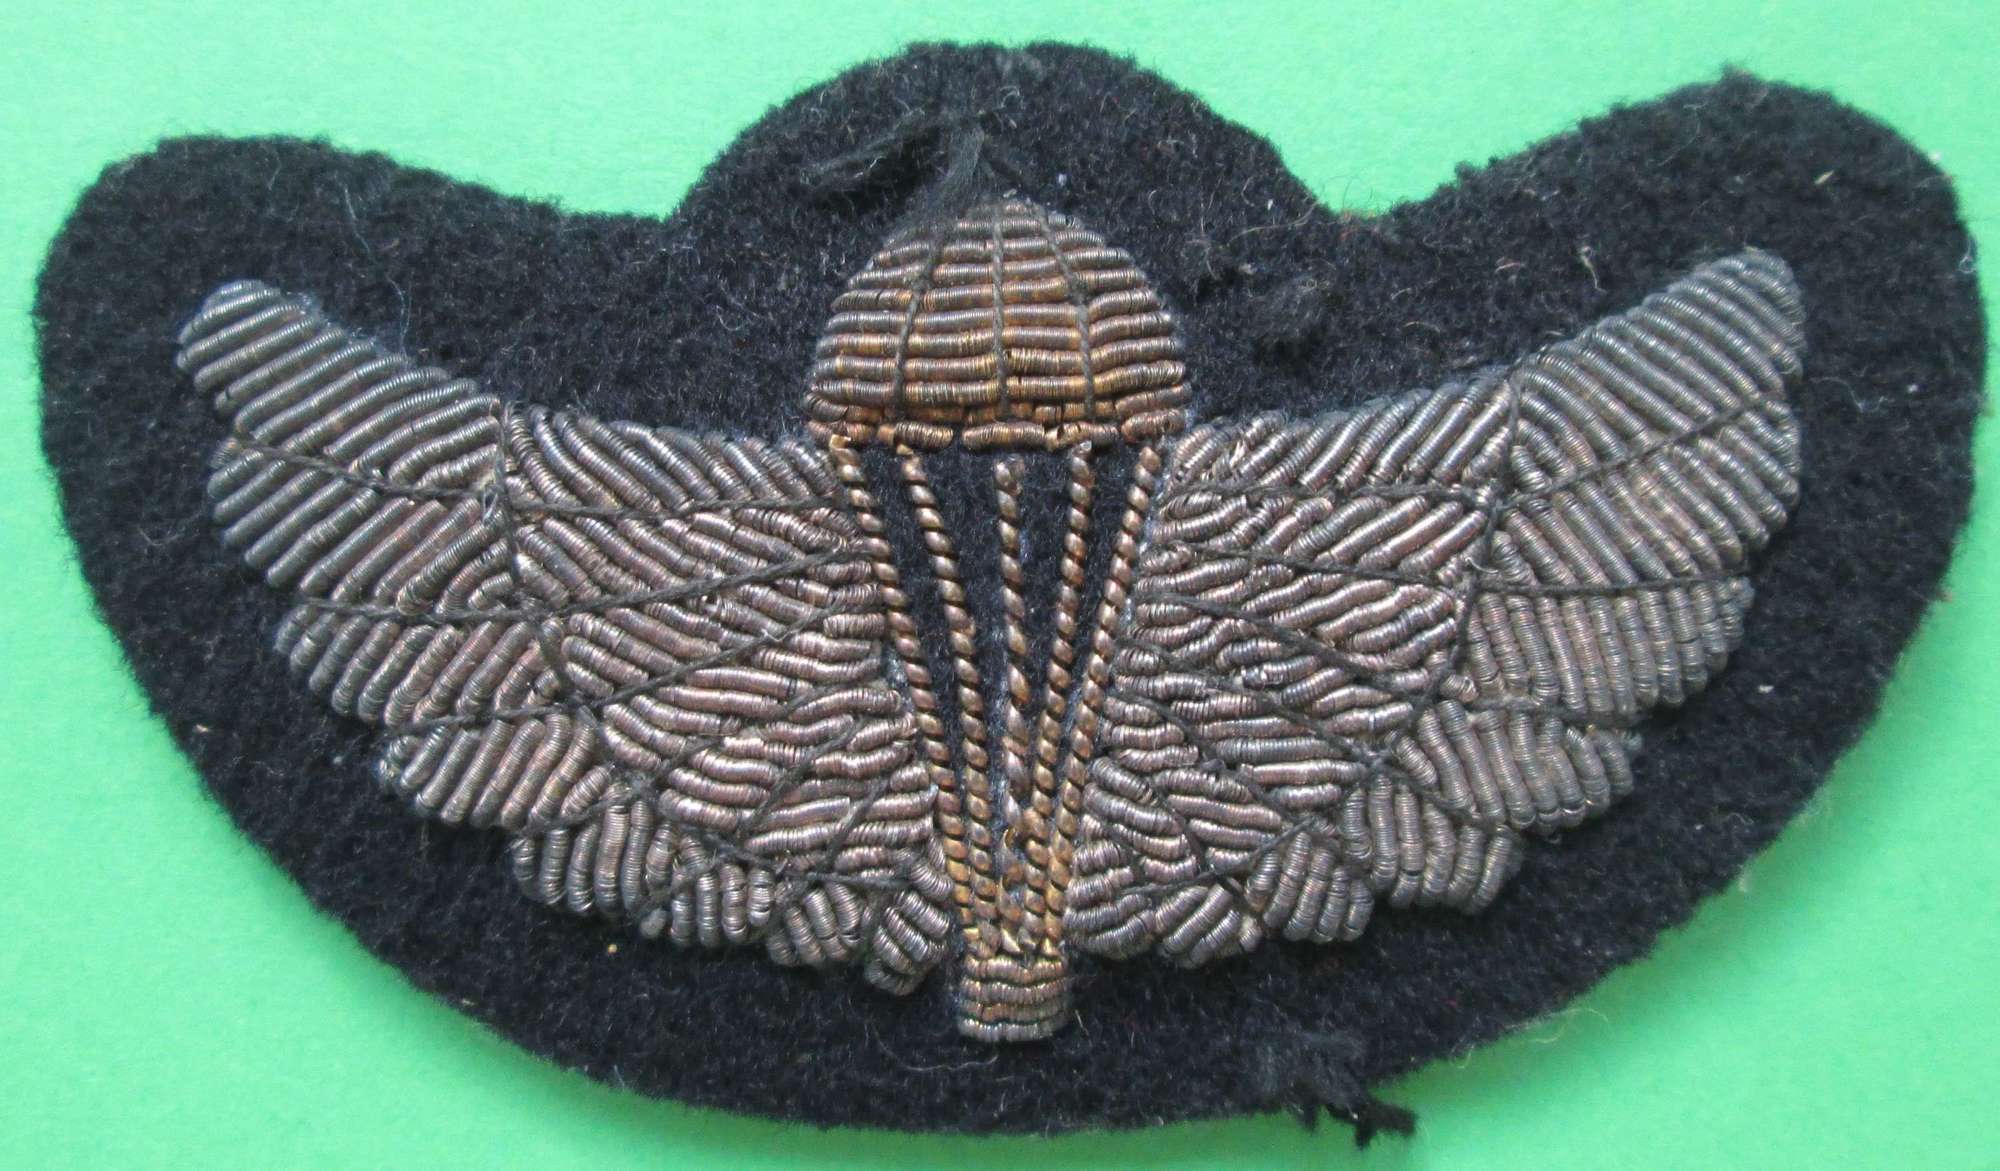 SAS OFFICER'S DRESS PARACHUTE WINGS IN BULLION WIRE